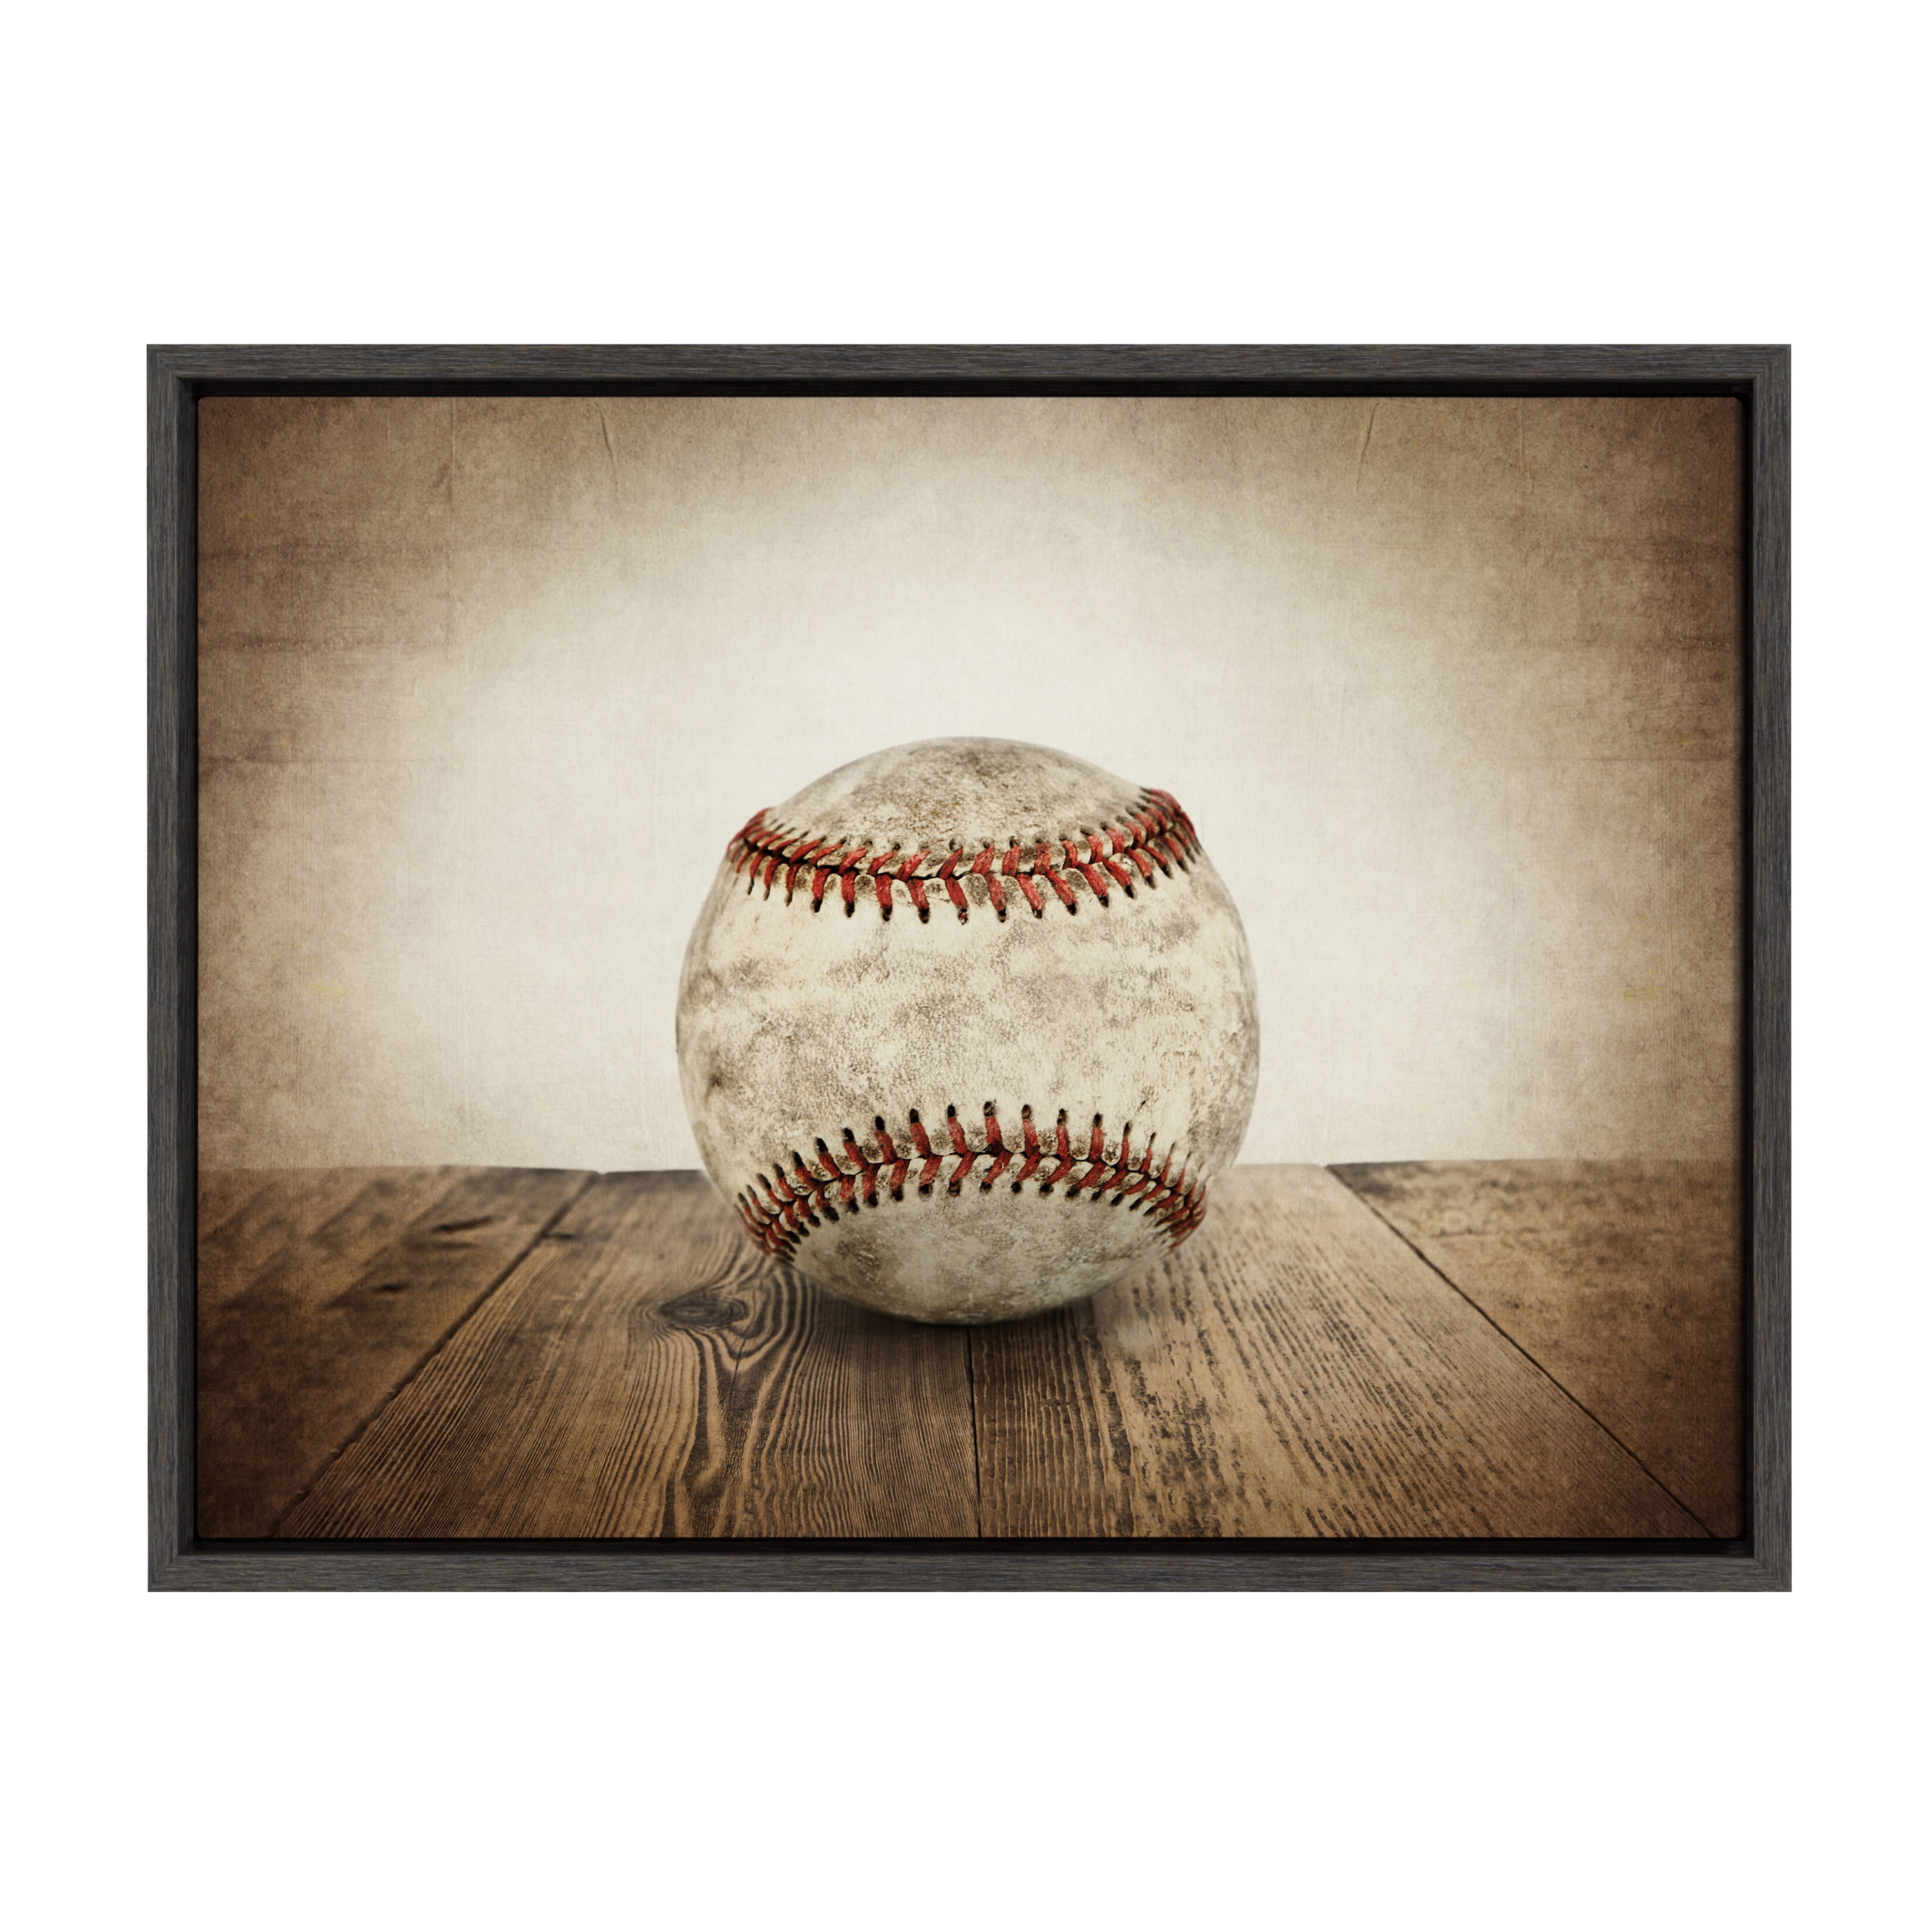 REPRINT PICTURE of old HOME BASE BALL GAME BOX COVER LABEL 5x7 